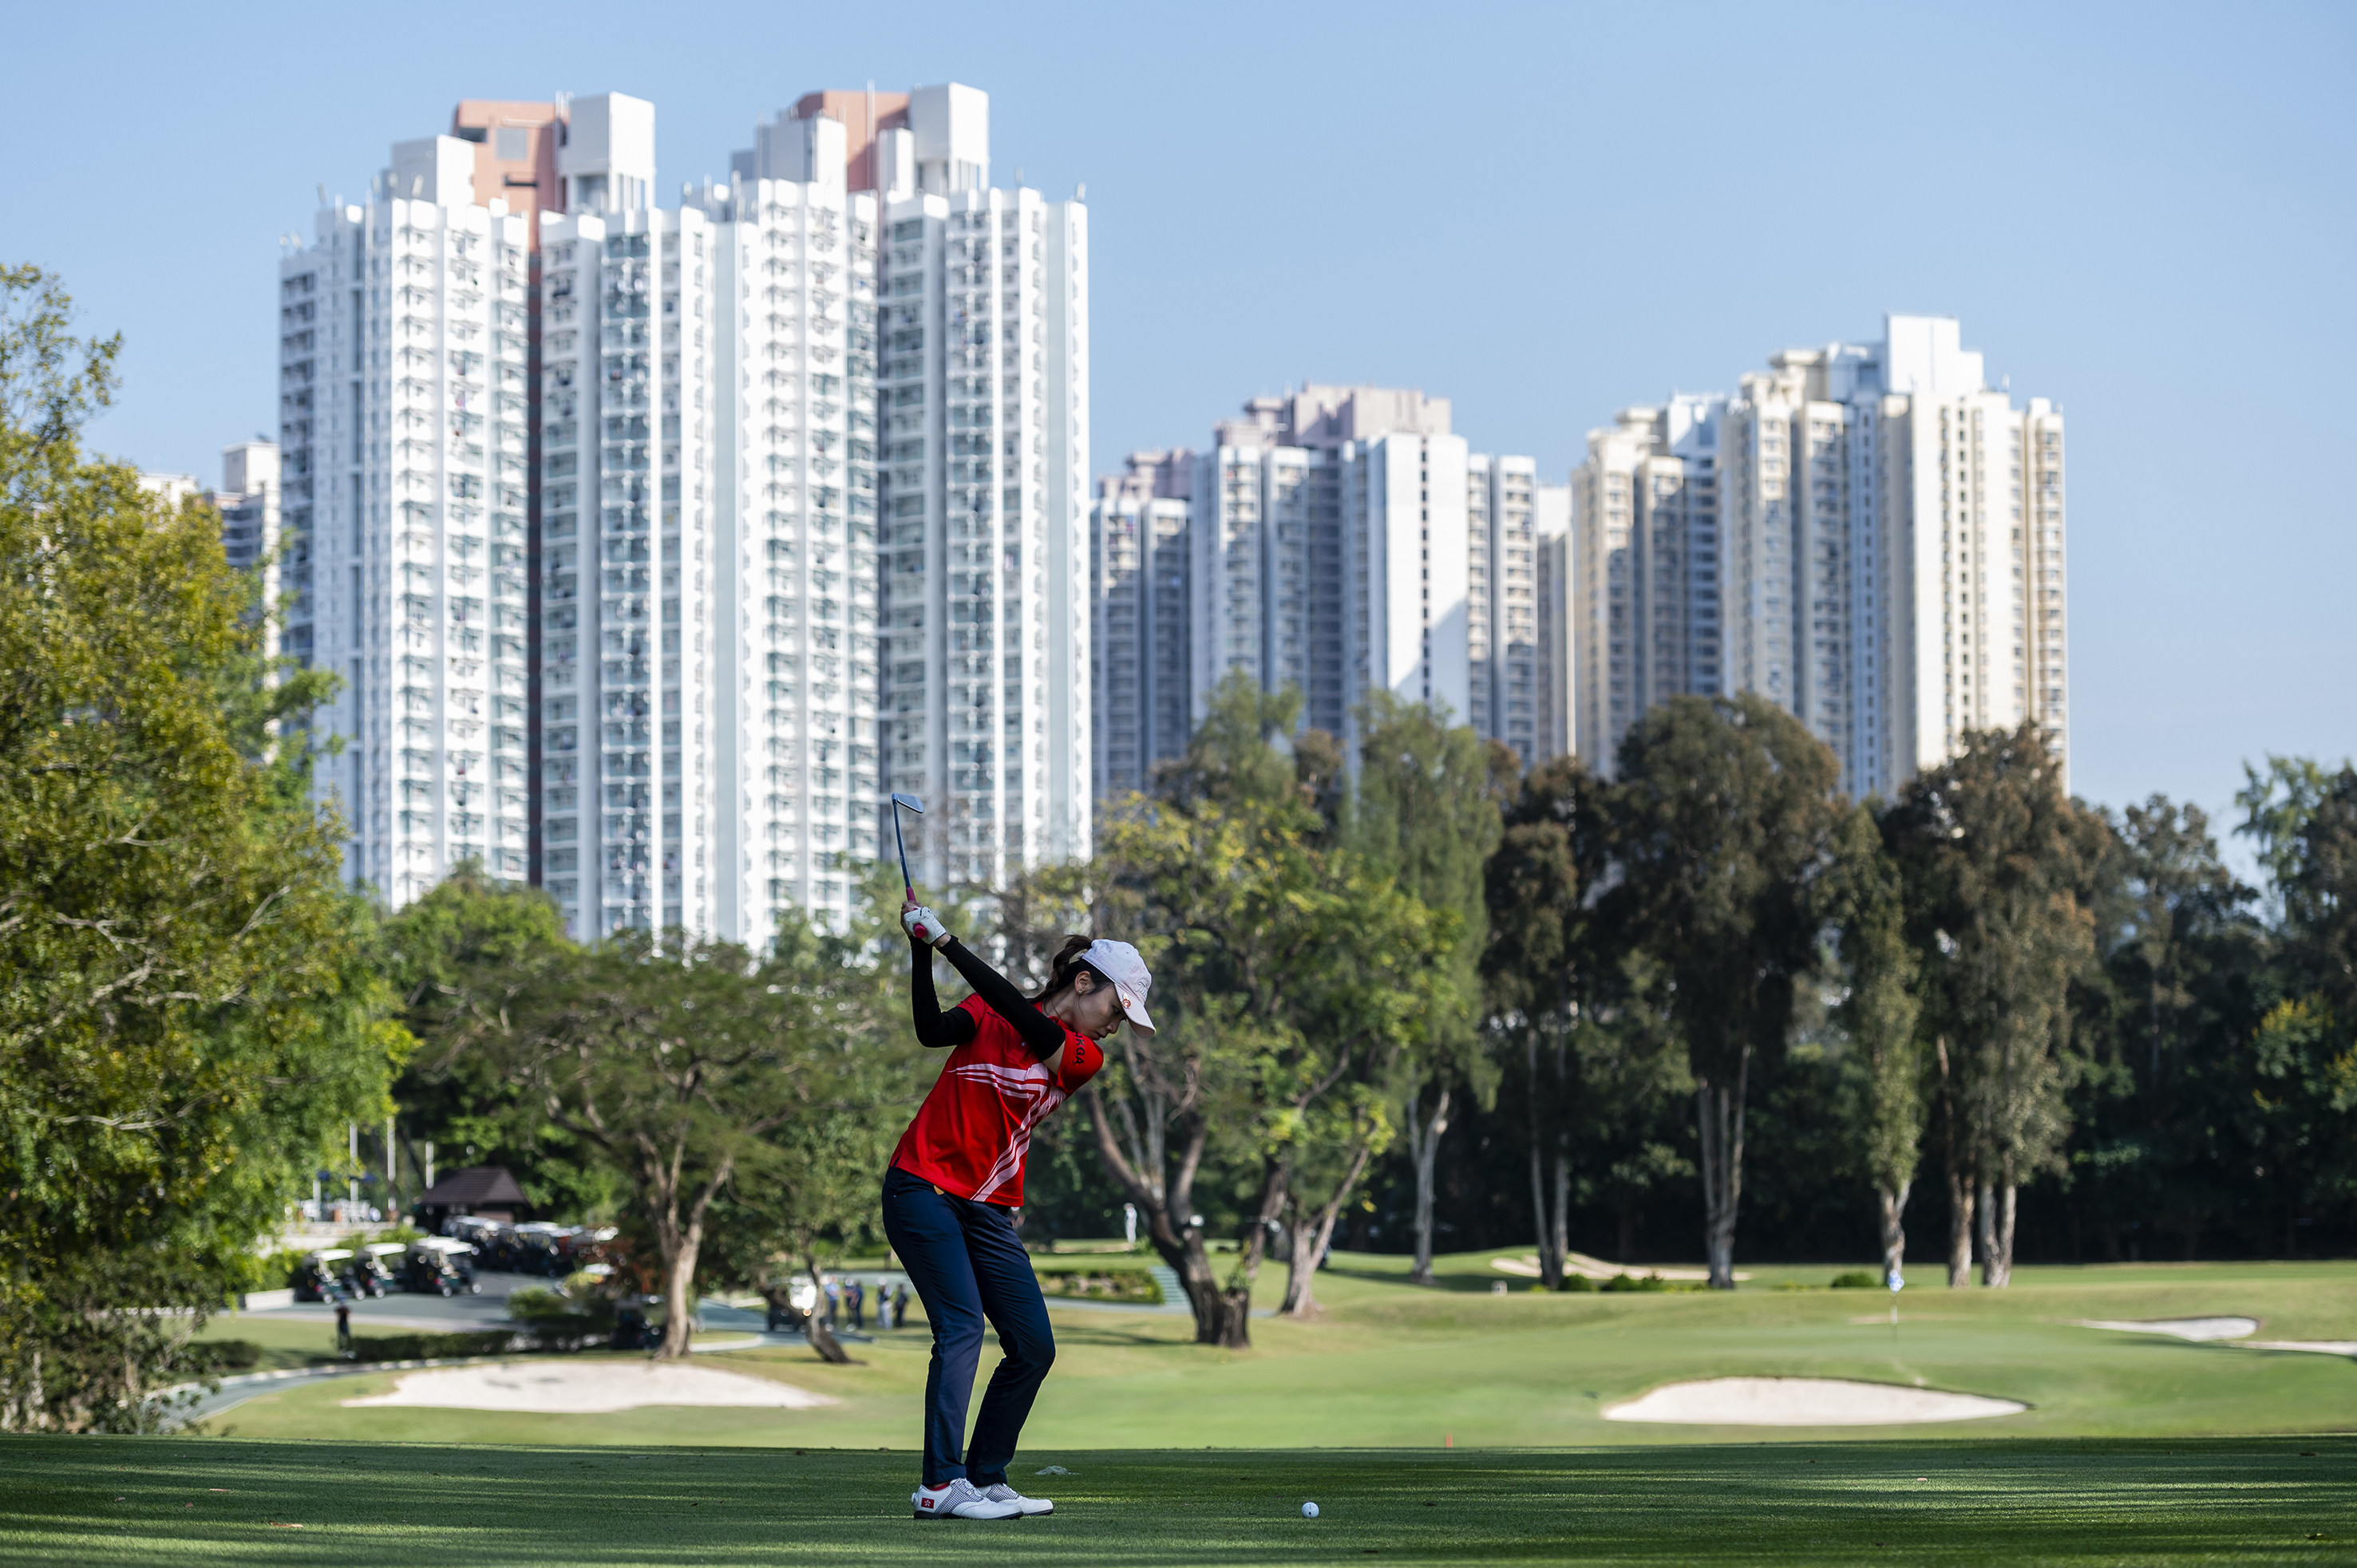 A golfer plays an approach shot at Hong Kong Golf Club in Fanling. The city’s government plans to take back control of a 32-hectare section of the site in September. Photo: Eurasia Sport Images/Getty Images